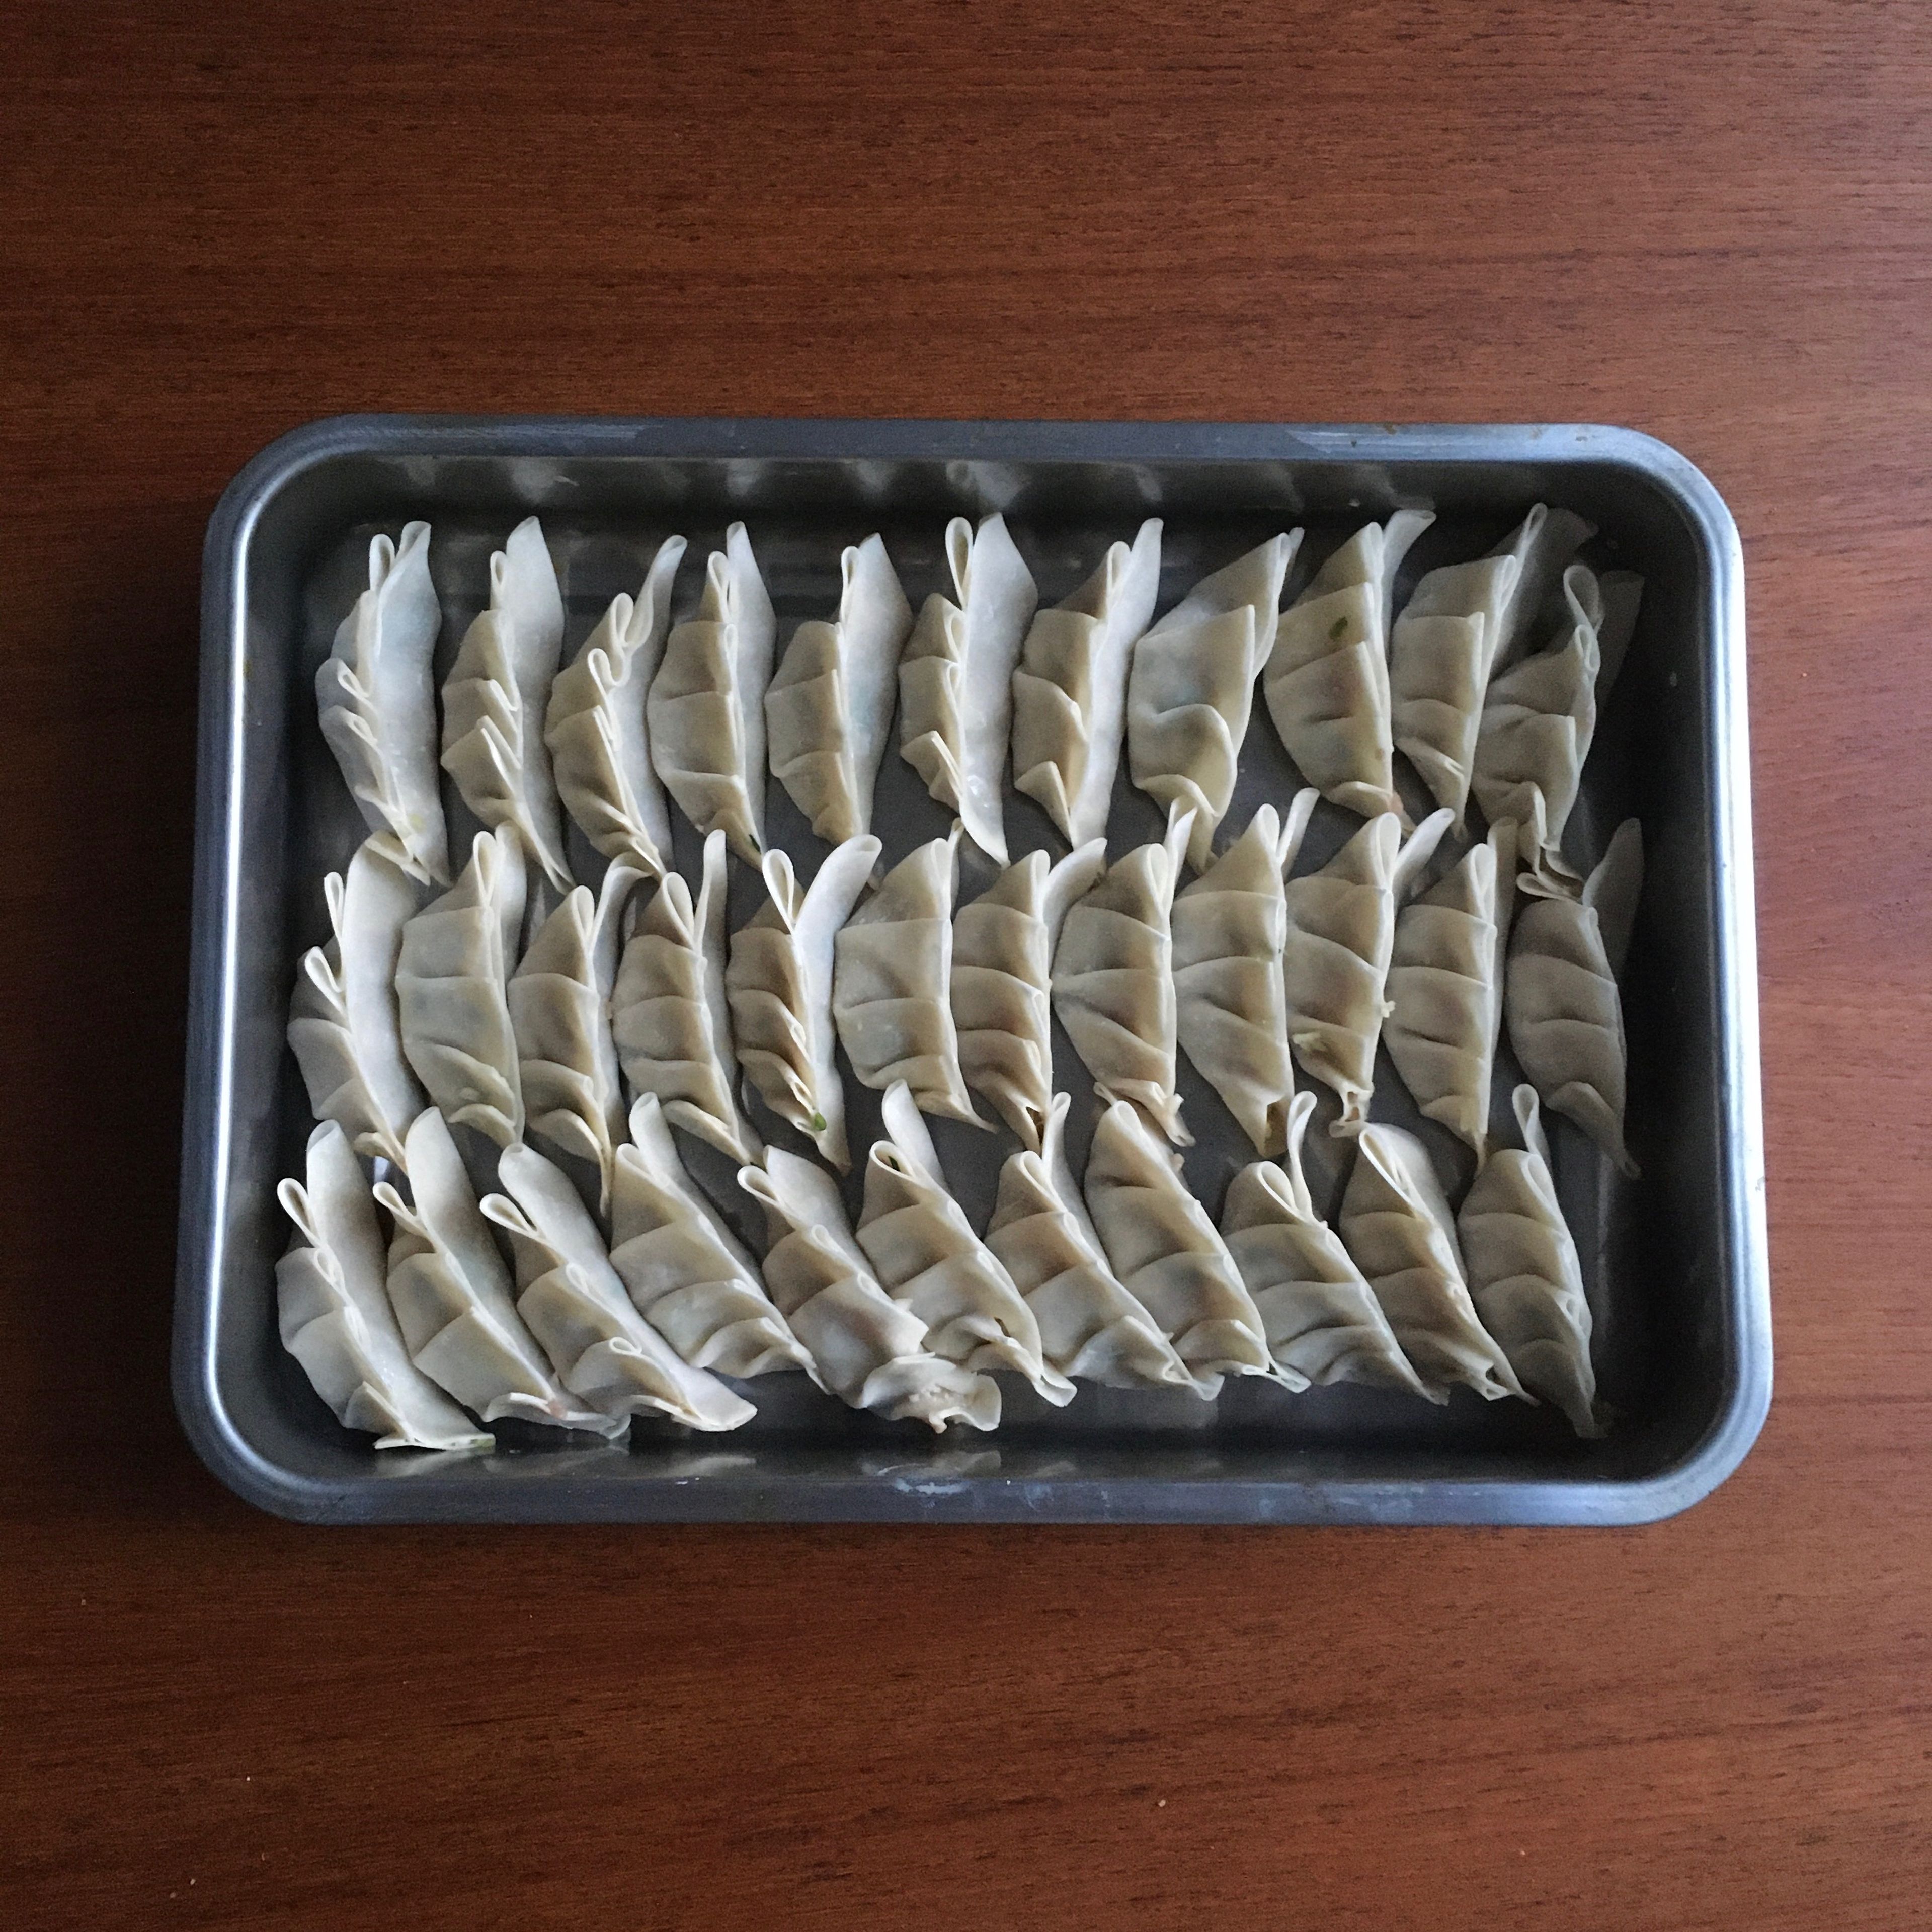 Place finished gyoza on a tray, or plate, as you continue filling the rest of the wrappers.